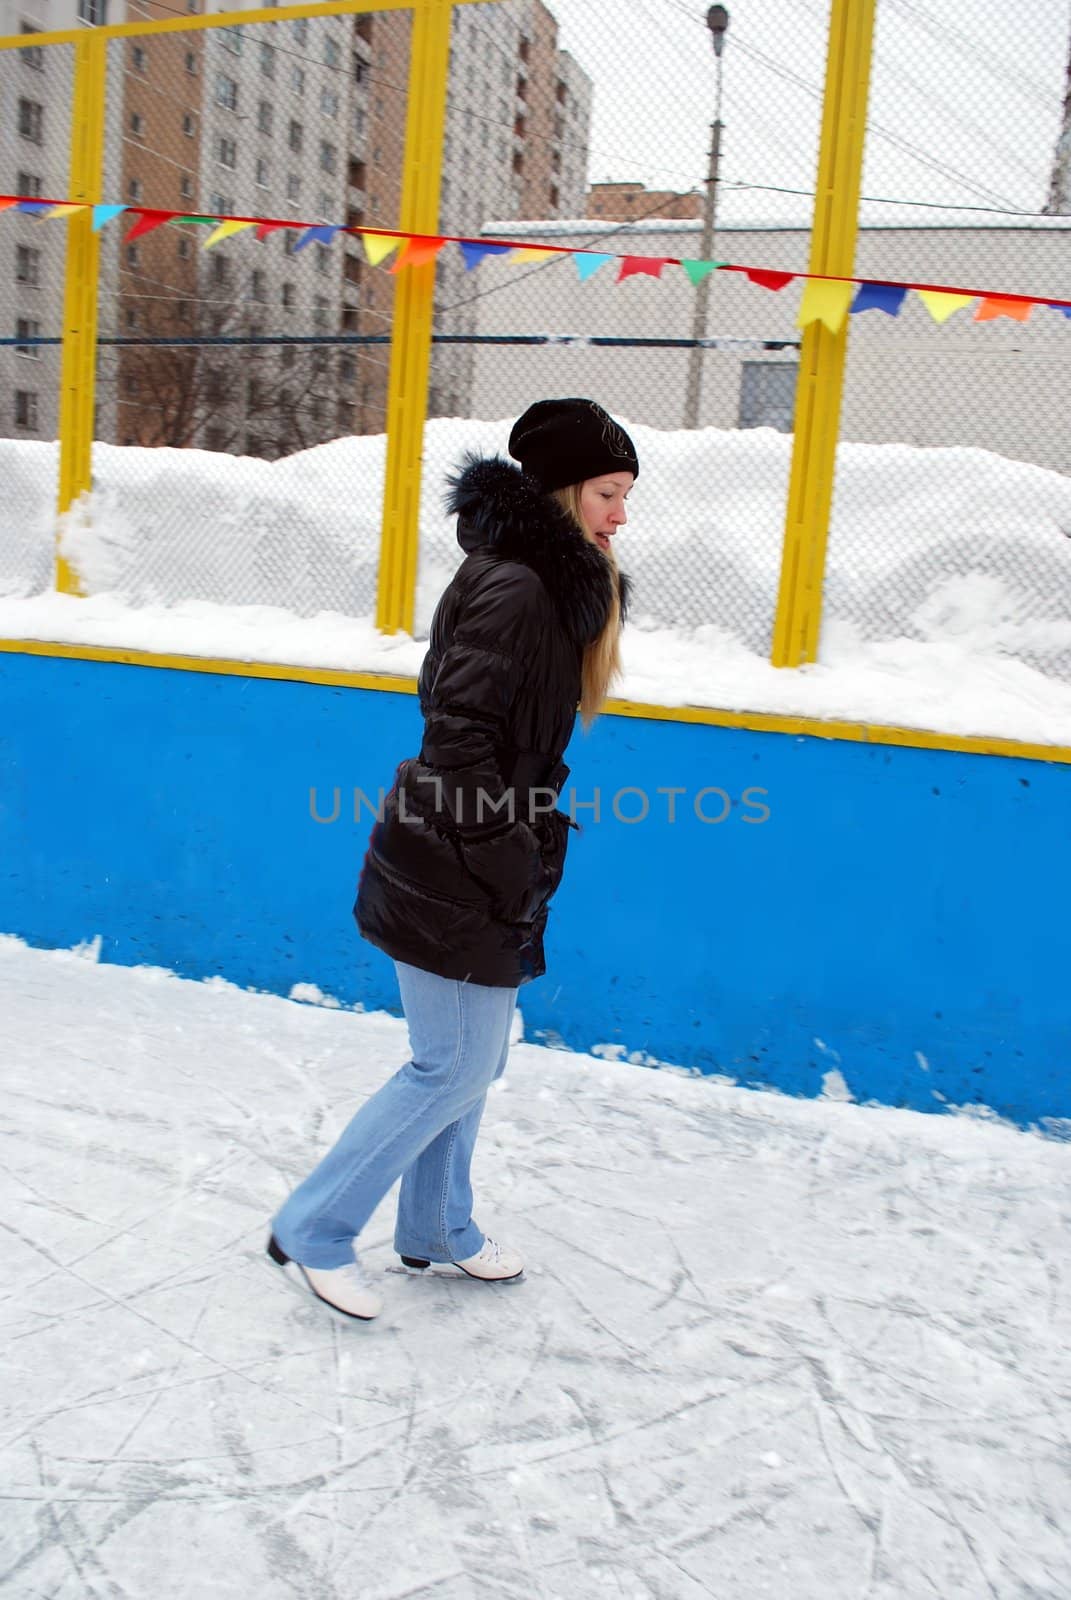 blond woman in jeans on a skates  by svtrotof